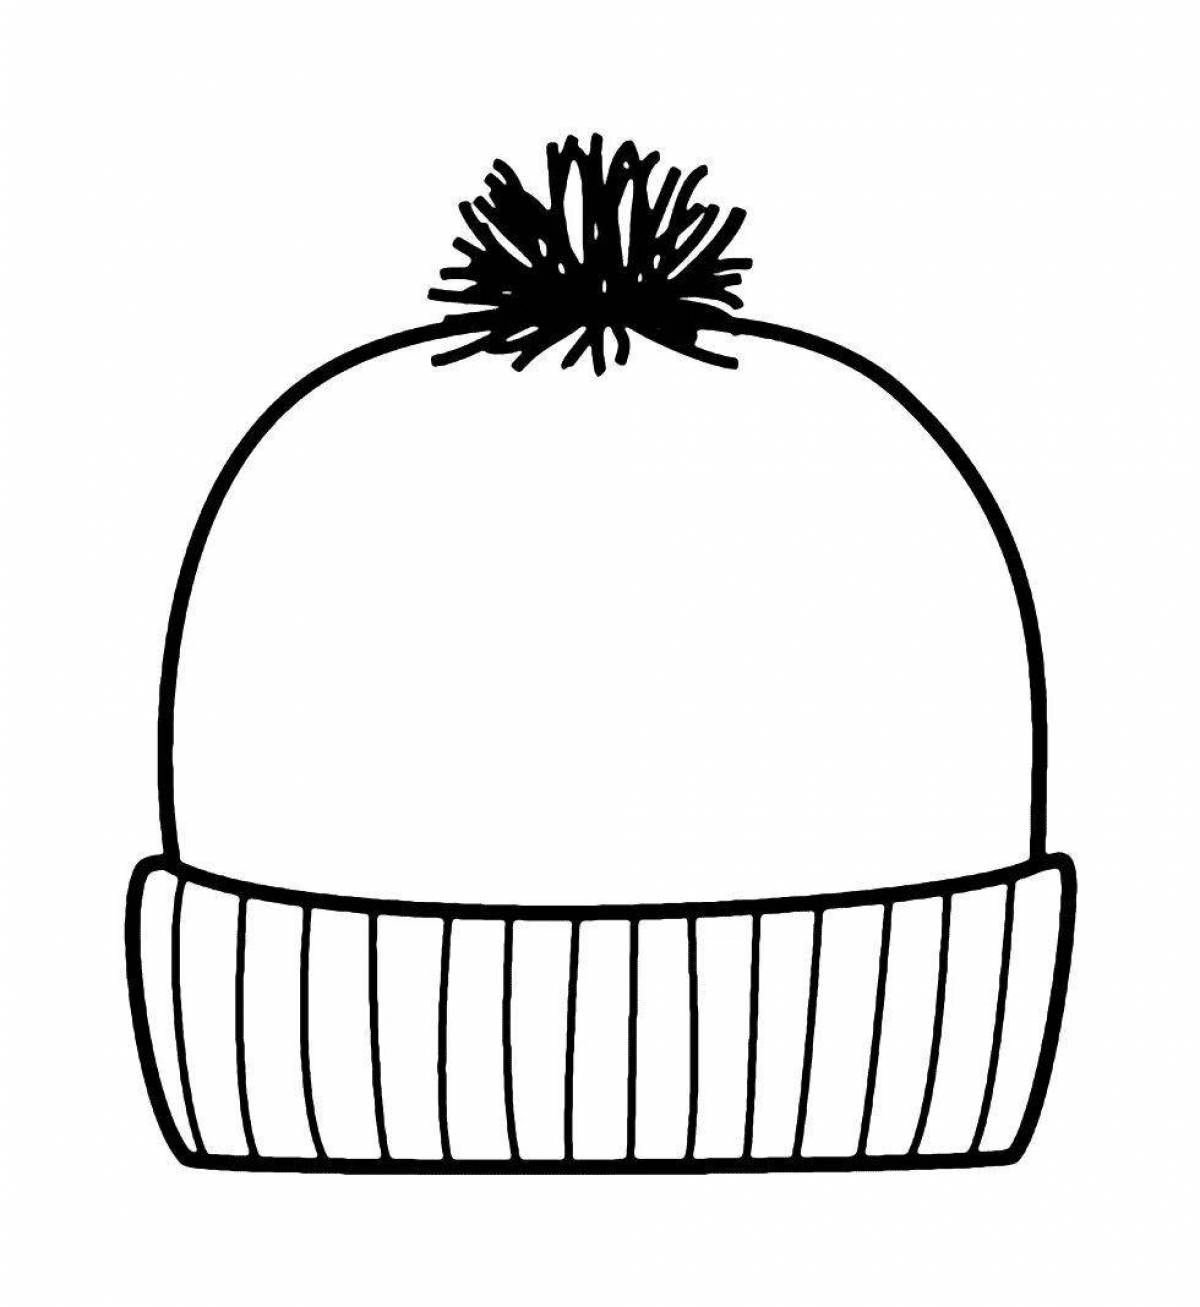 Playful hat coloring page for toddlers 2-3 years old